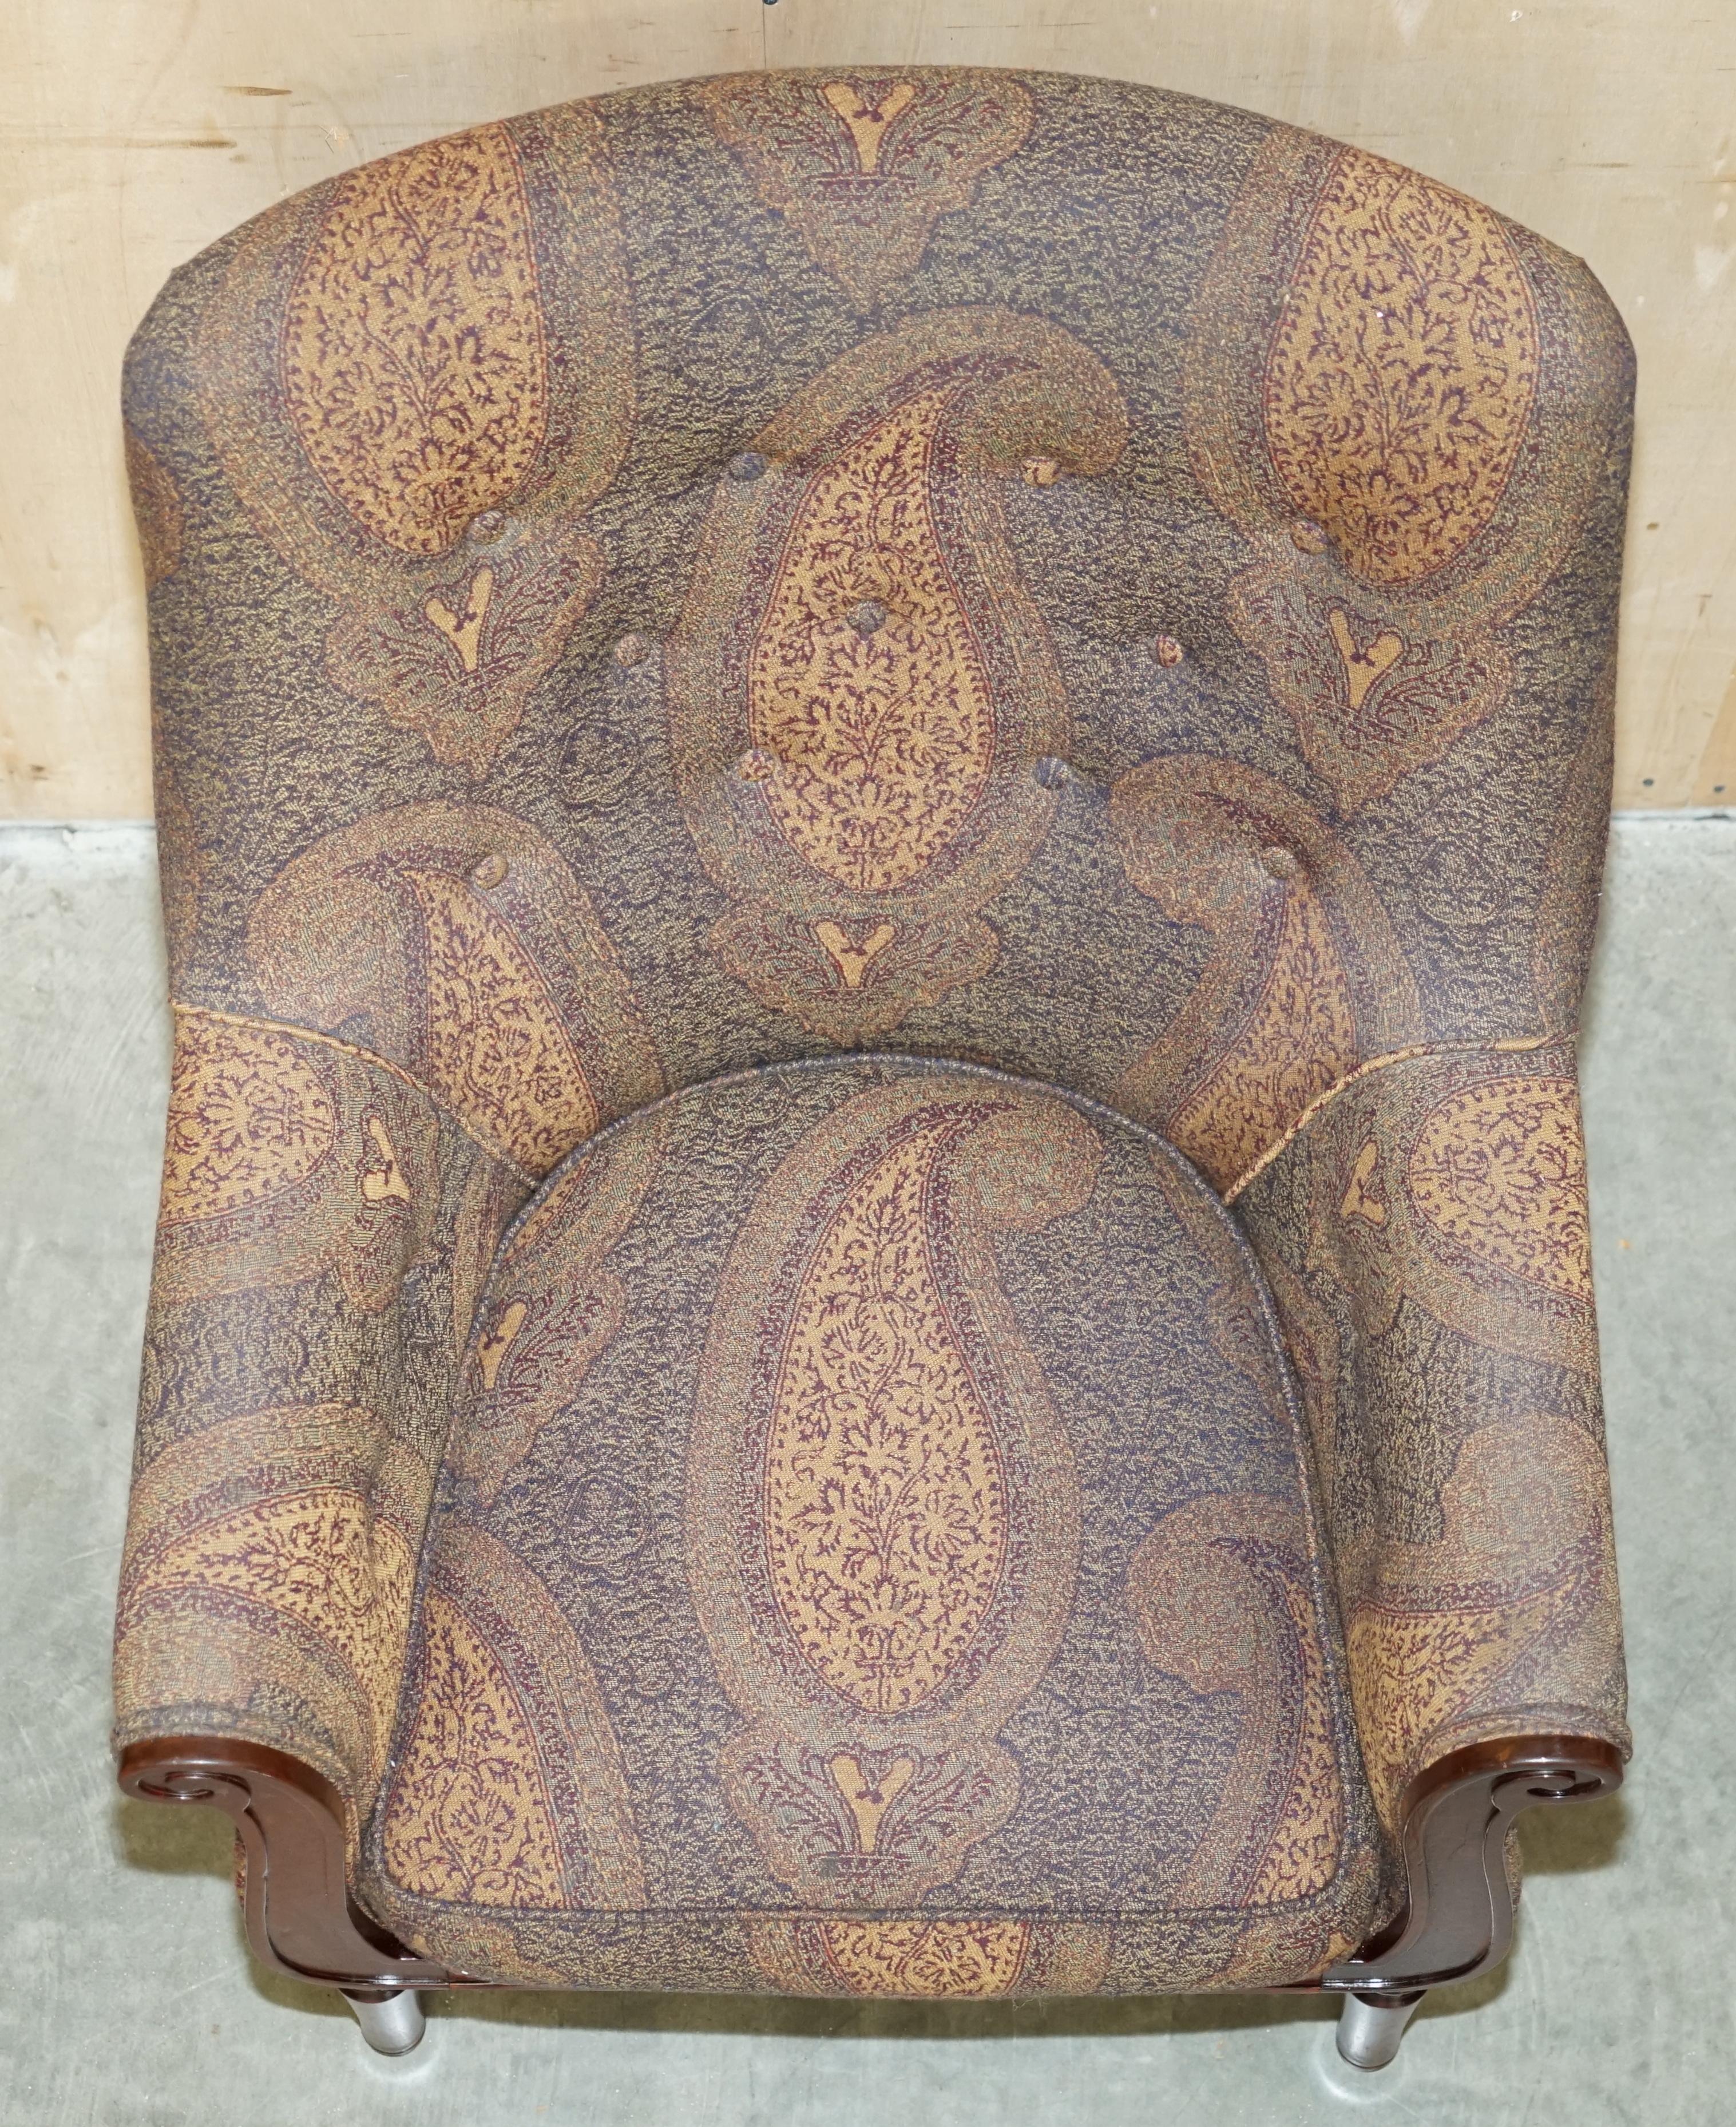 PAiR OF GEORGE SMITH WILLIAM IV LIBRARY ARMCHAIRS UNIQUE UPHOLSTERY For Sale 4